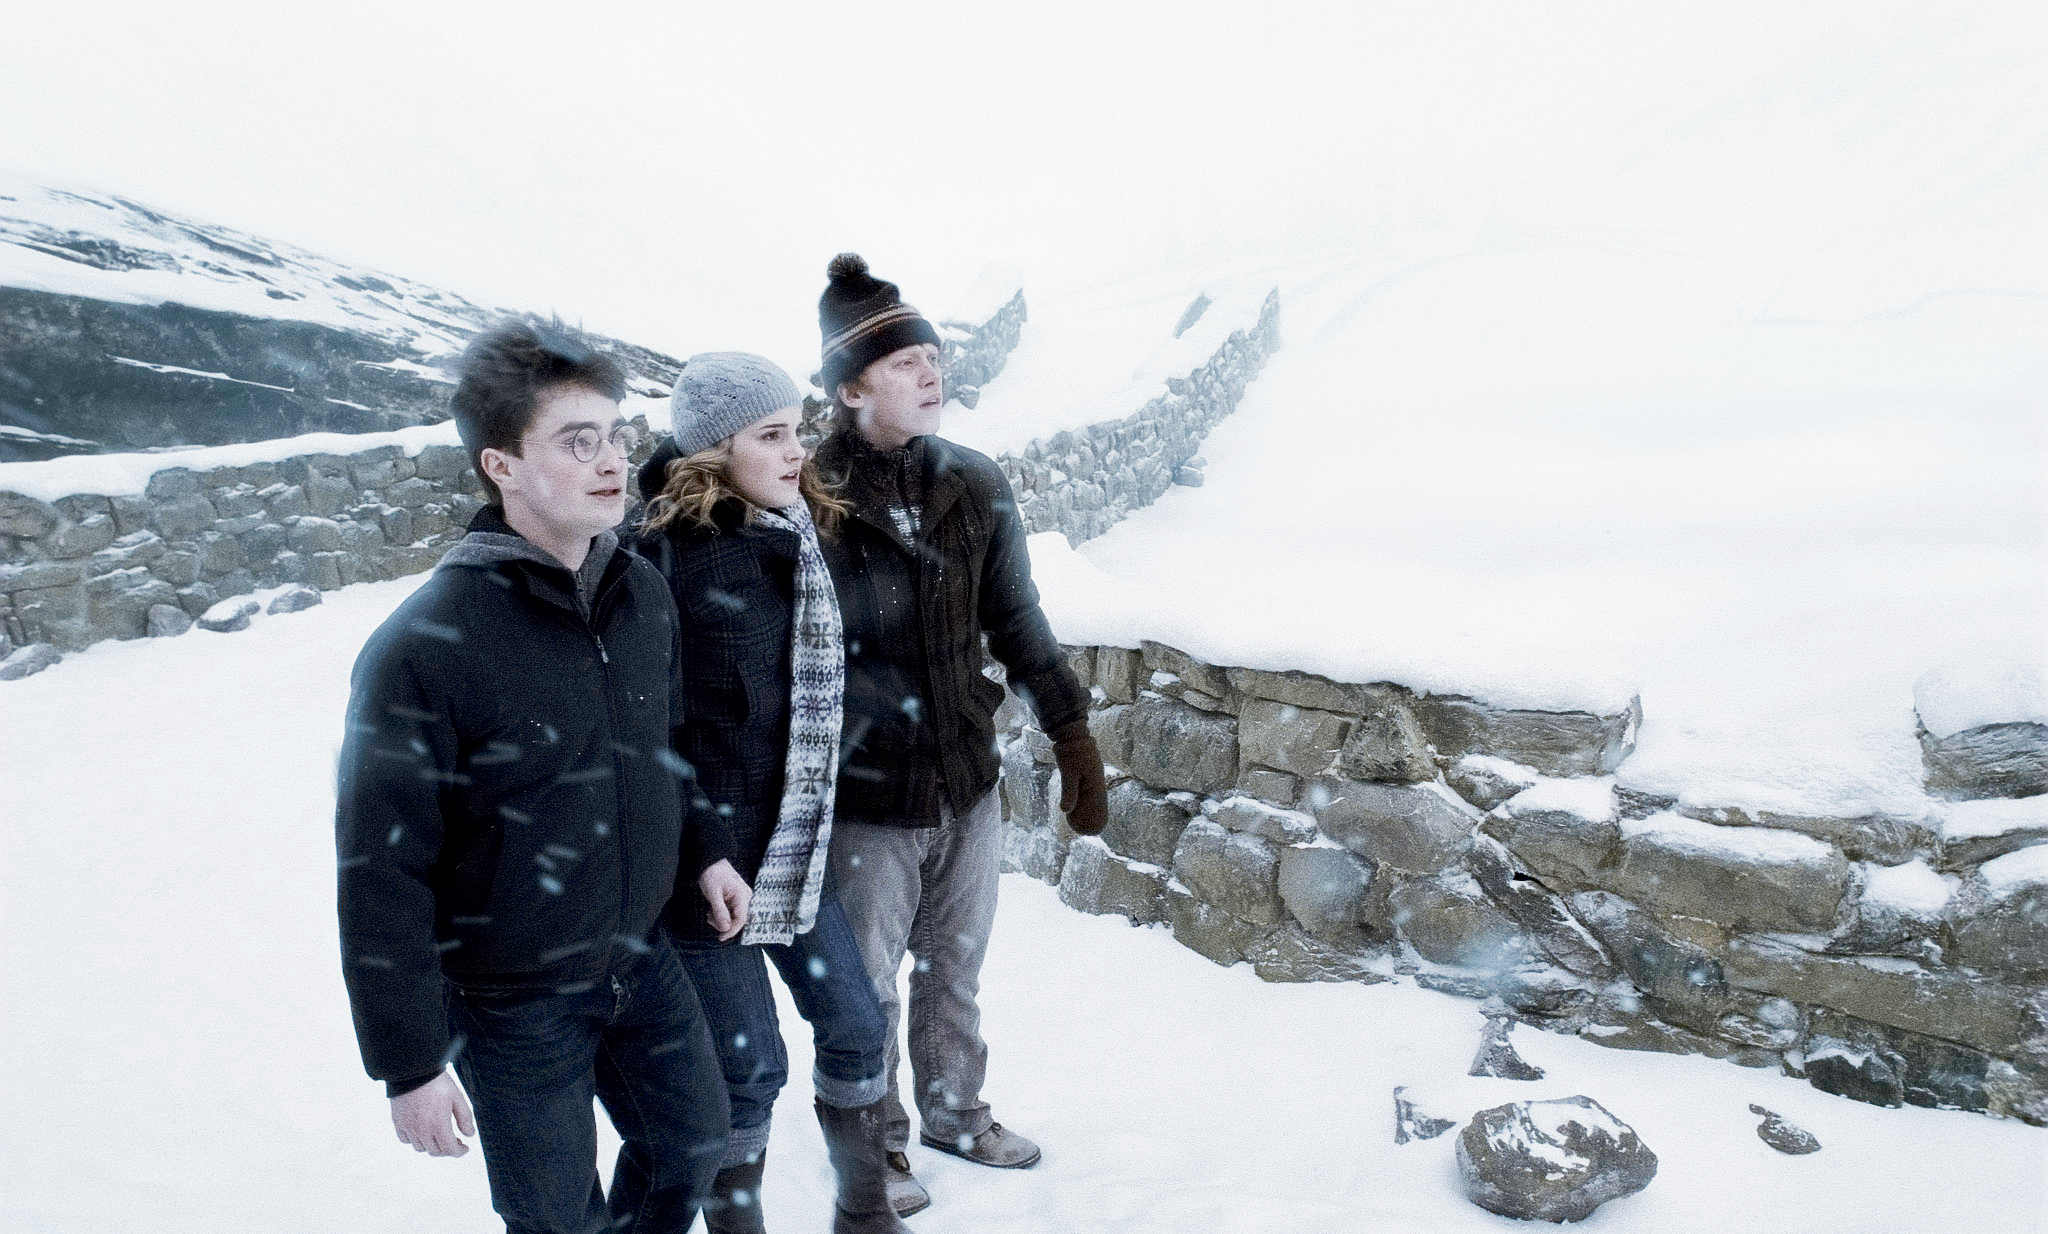 Daniel Radcliffe, Emma Watson and Rupert Grint in Warner Bros Pictures' Harry Potter and the Half-Blood Prince (2009)